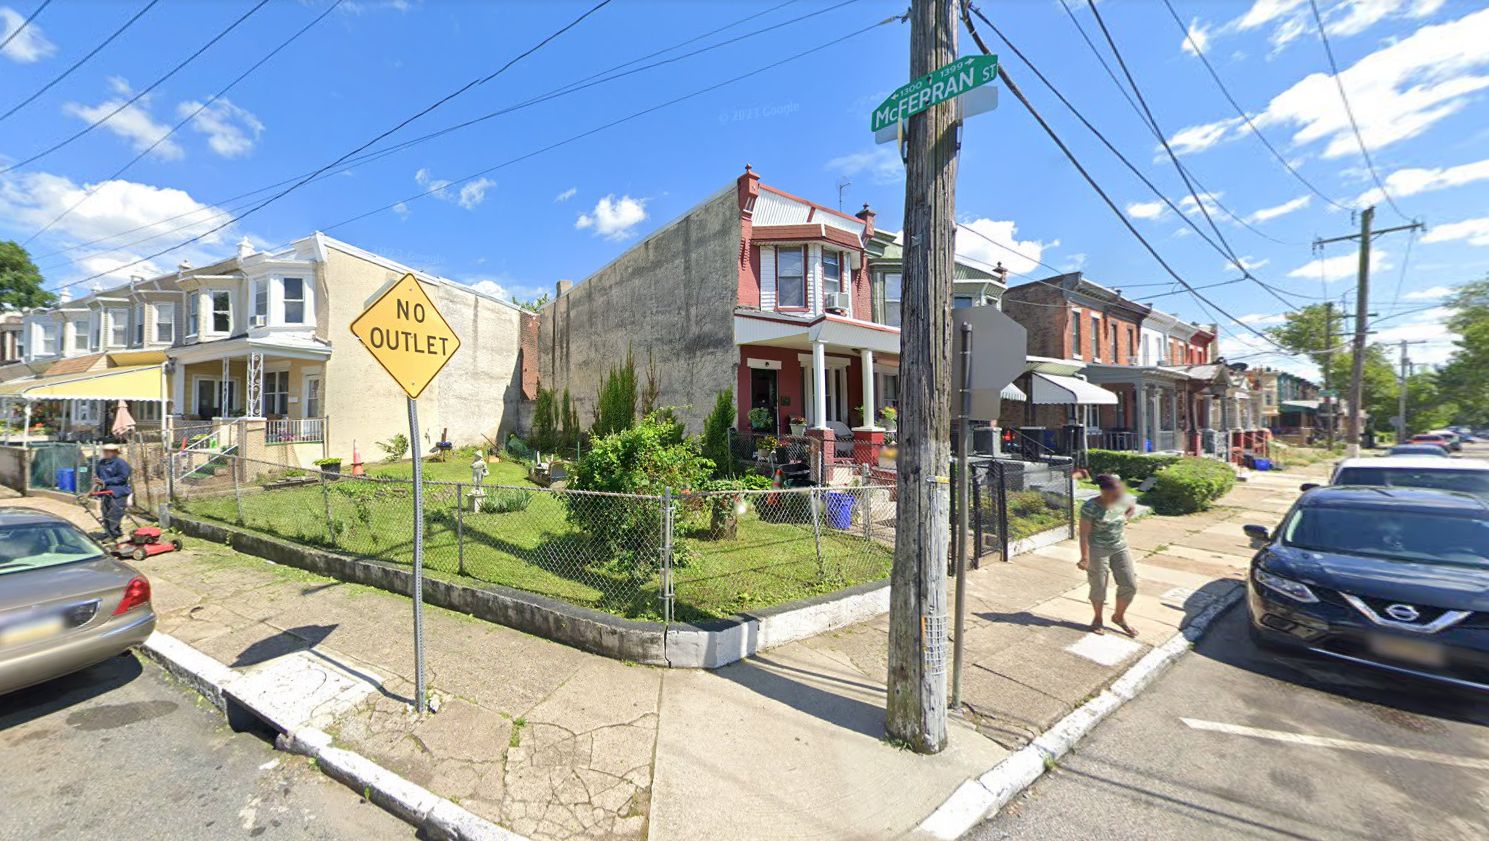 3929 North Park Avenue prior to redevelopment. Looking east. June 2019. Credit: Google Street View